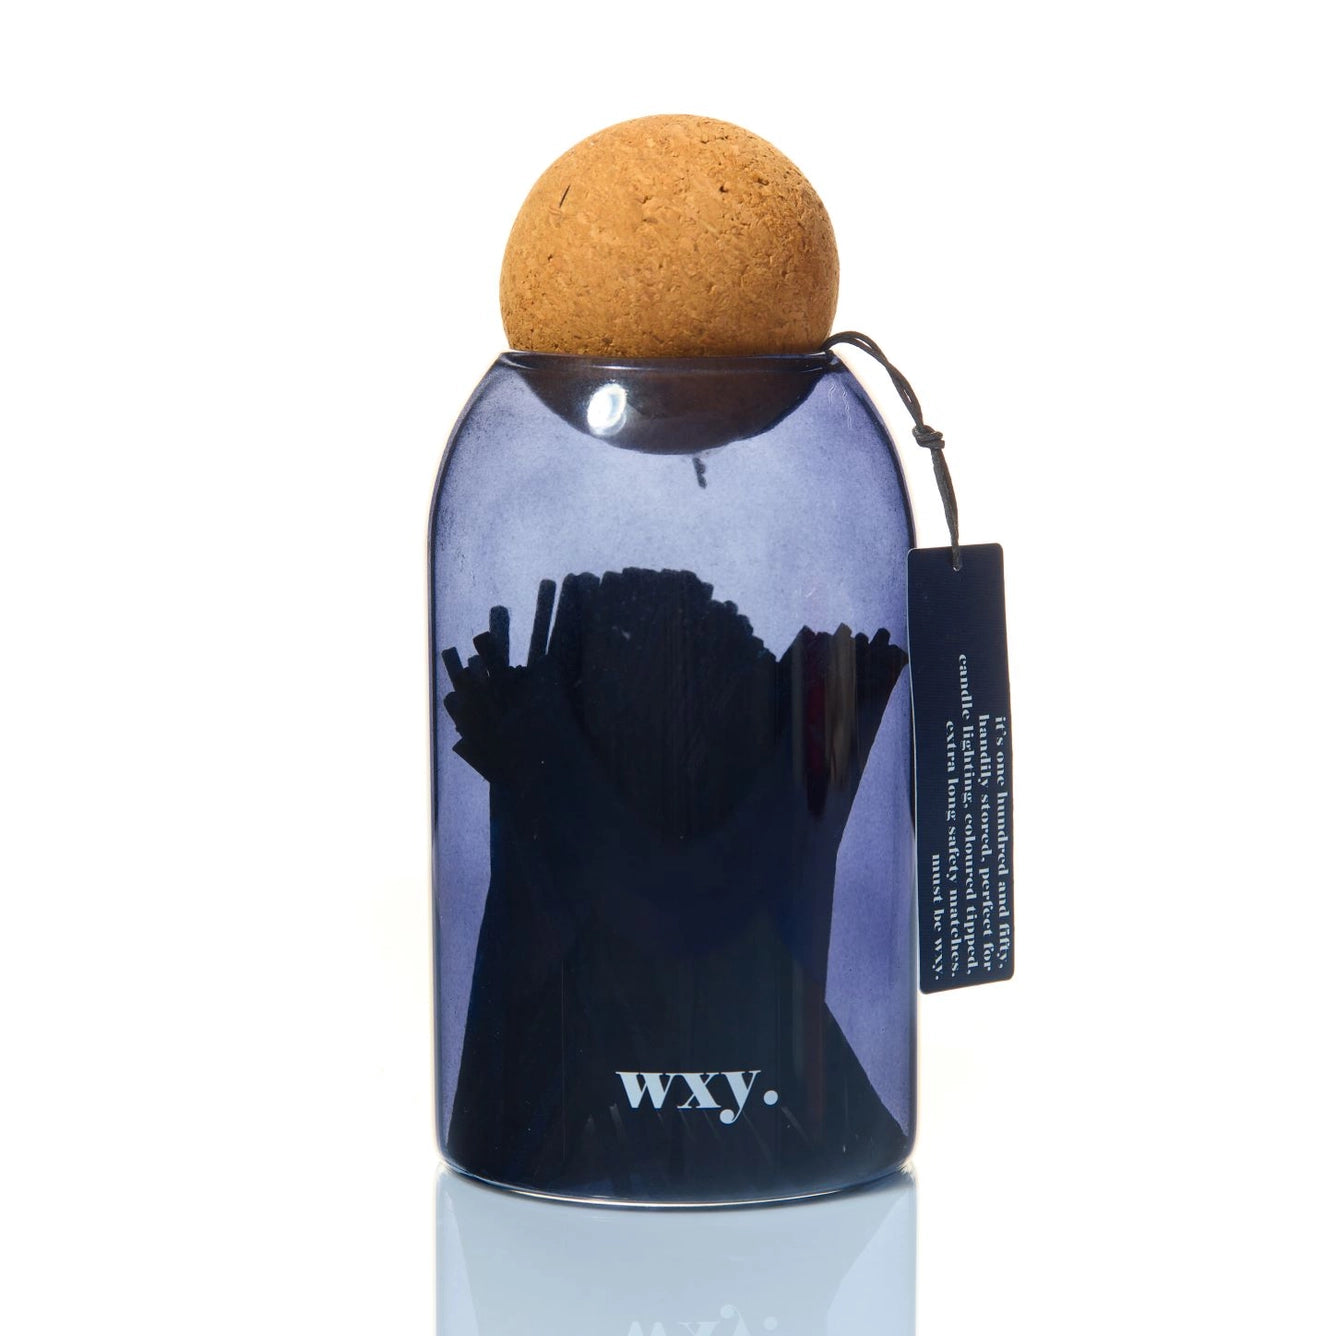 WYX Bubble Jar including 150 matches. Navy.